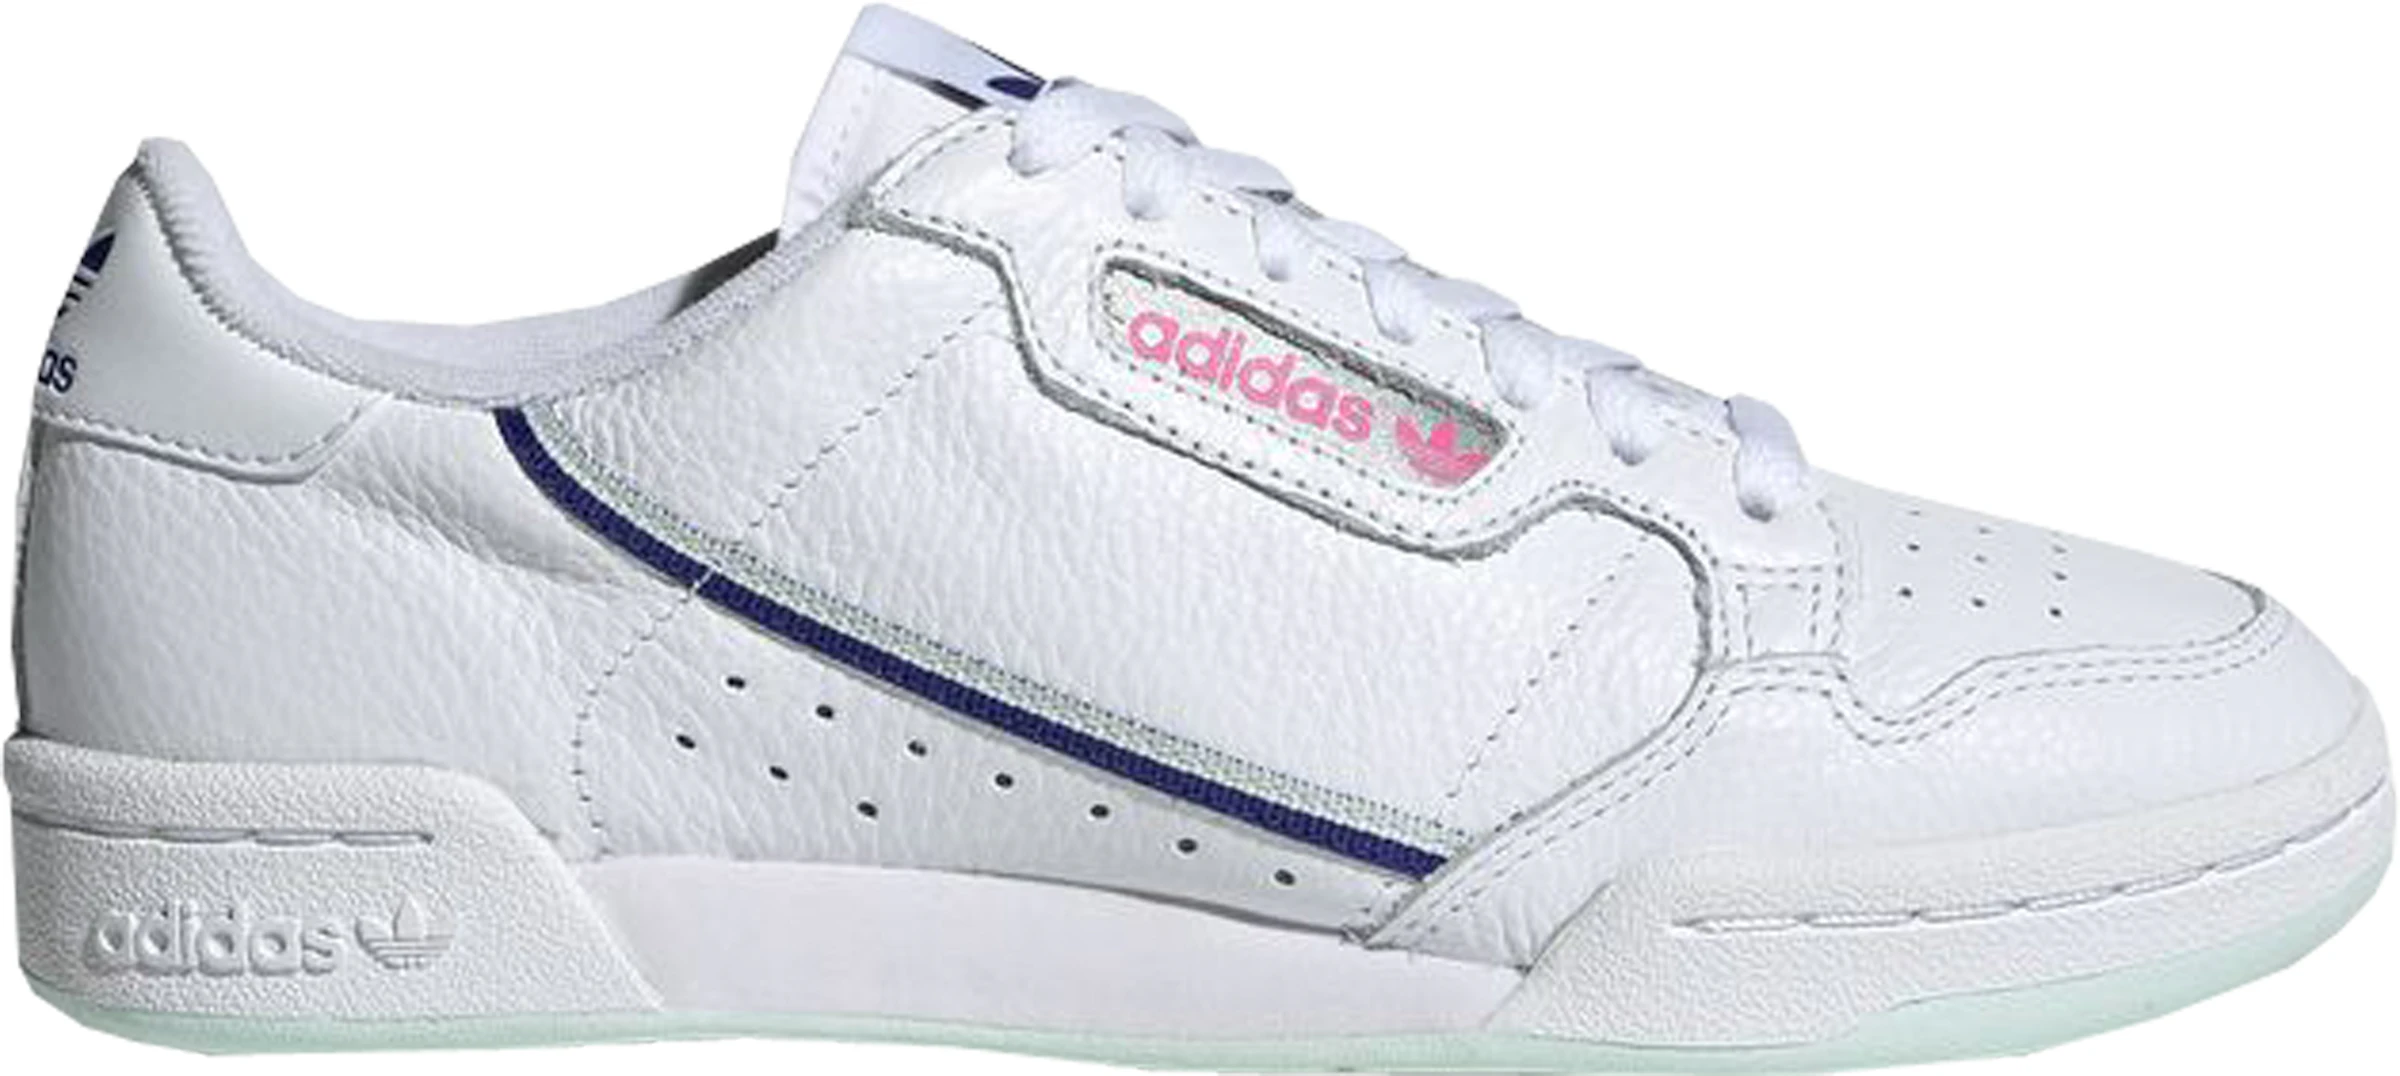 adidas Continental 80 Cloud White Ice Mint (W) - G27725 US